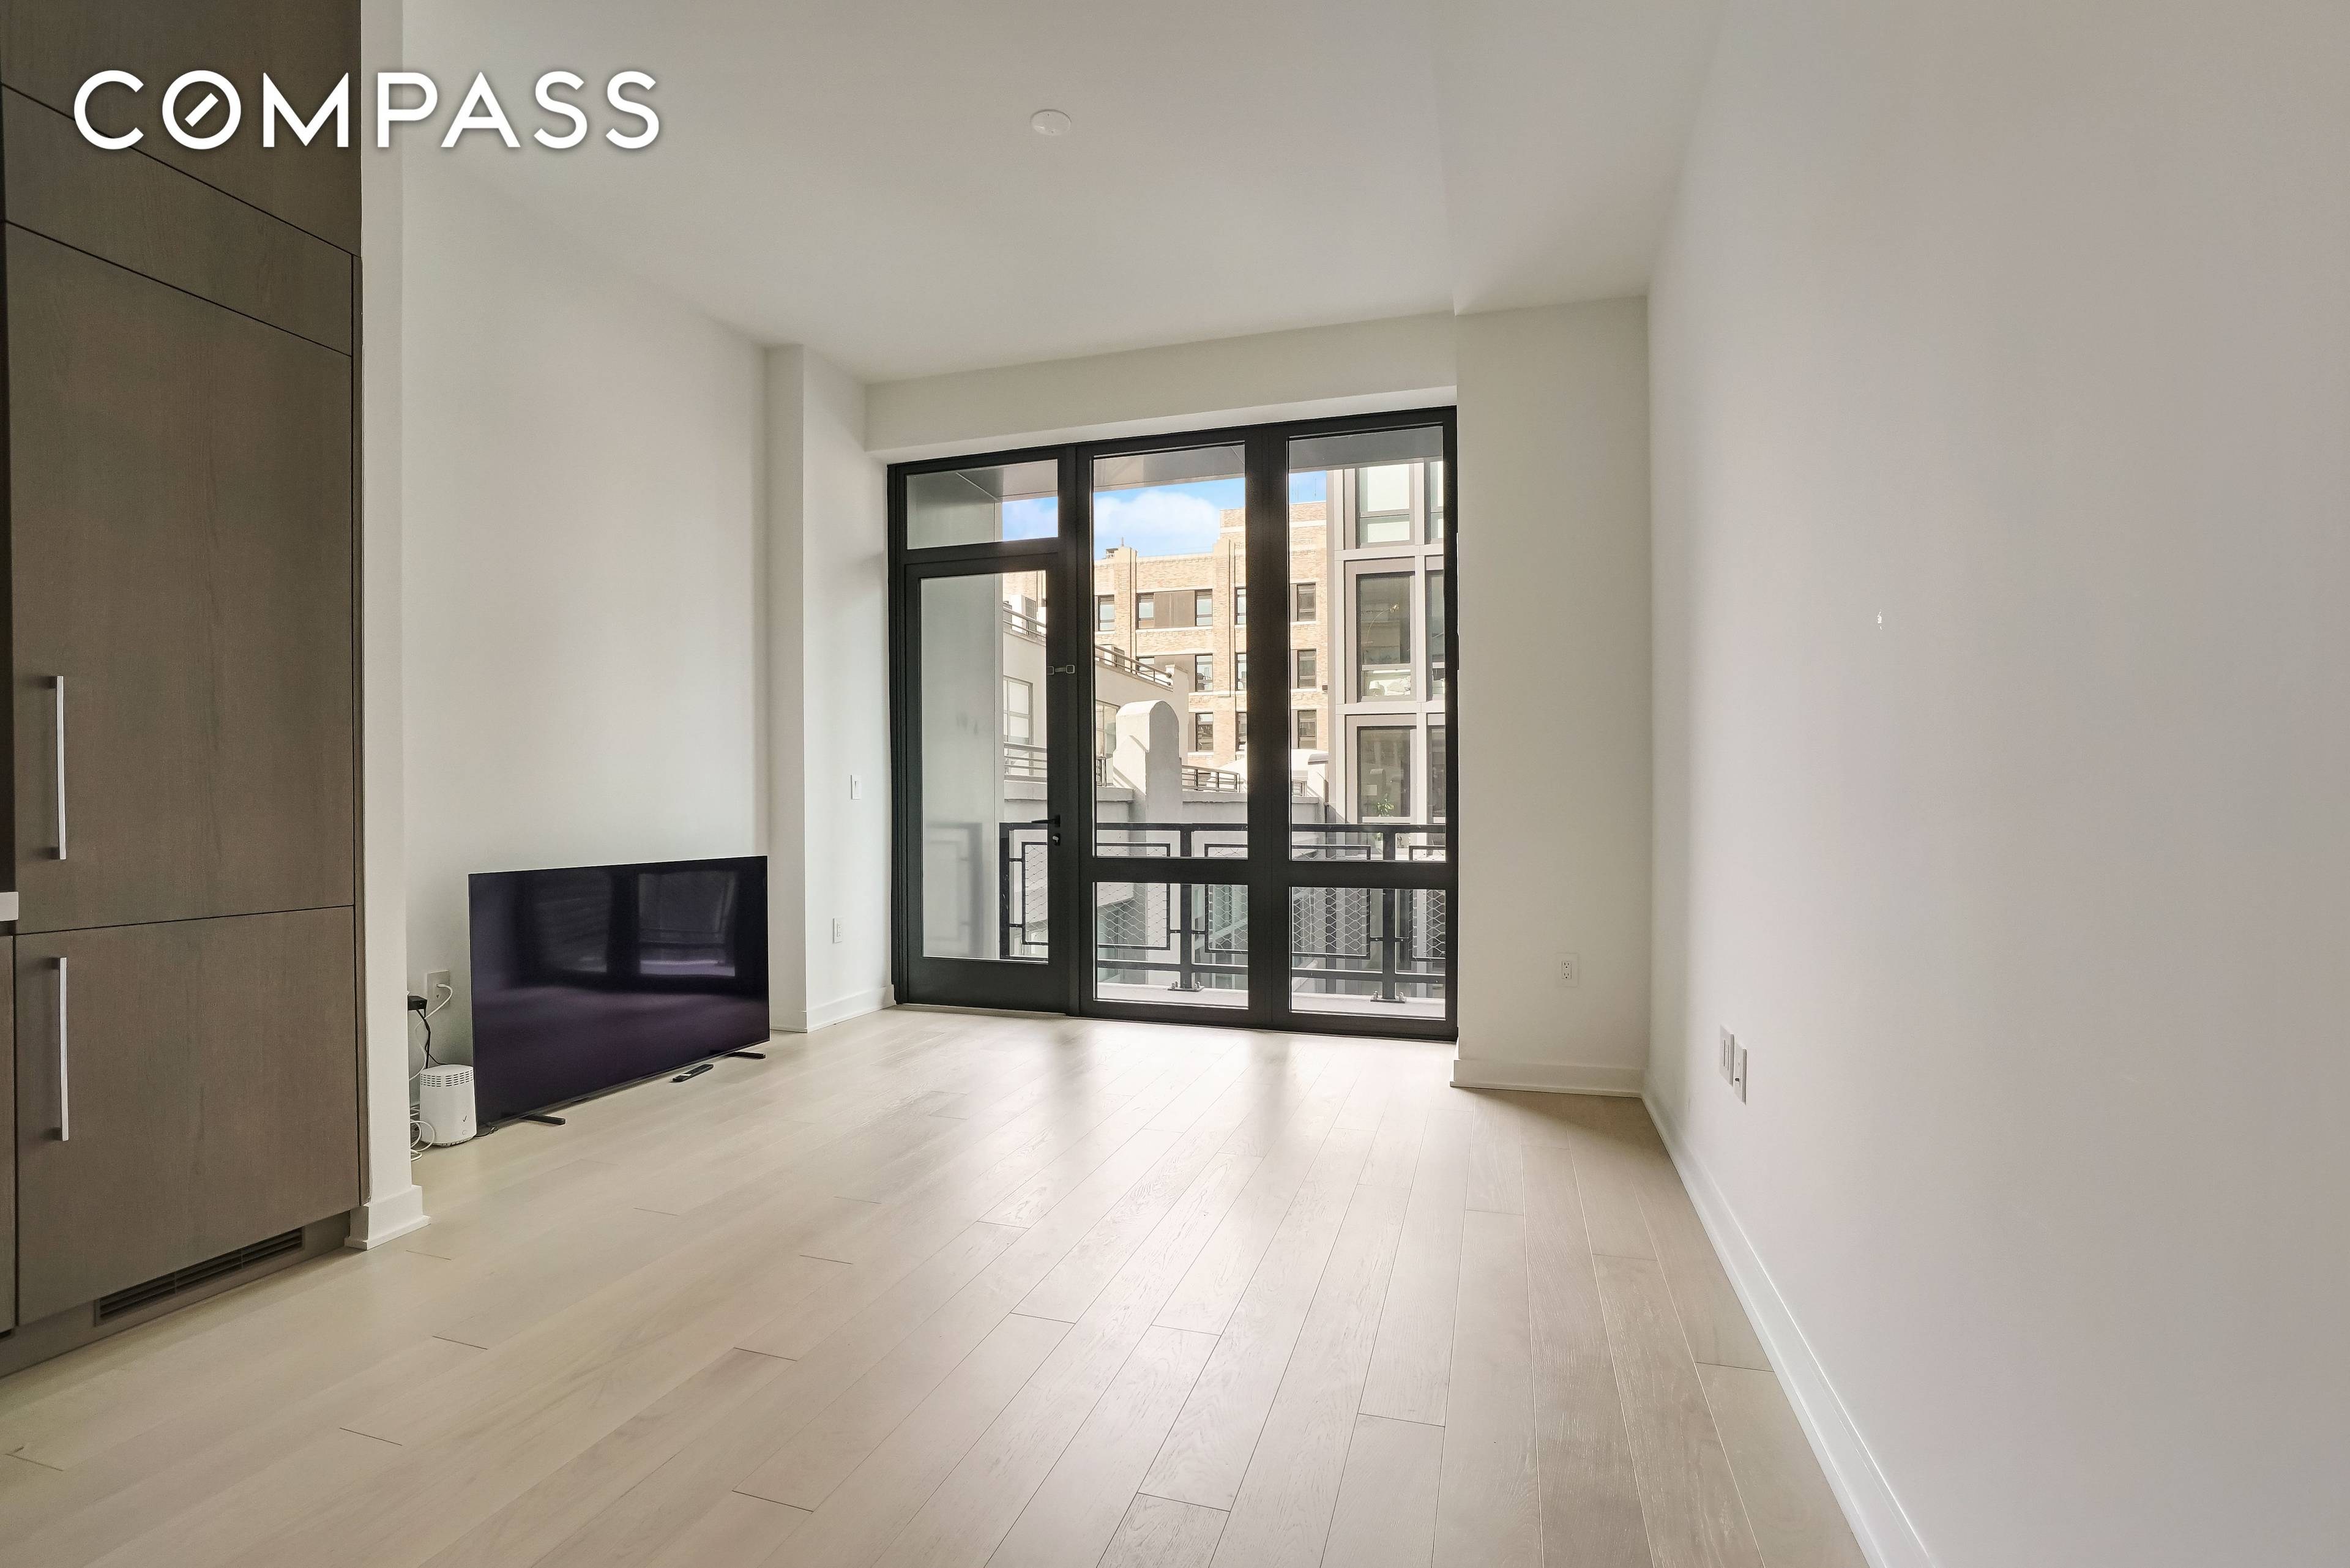 Be the first one to live in this 570 SF light filled alcove studio residence with northern exposure and a private balcony overlooking a lushly landscaped interior courtyard.